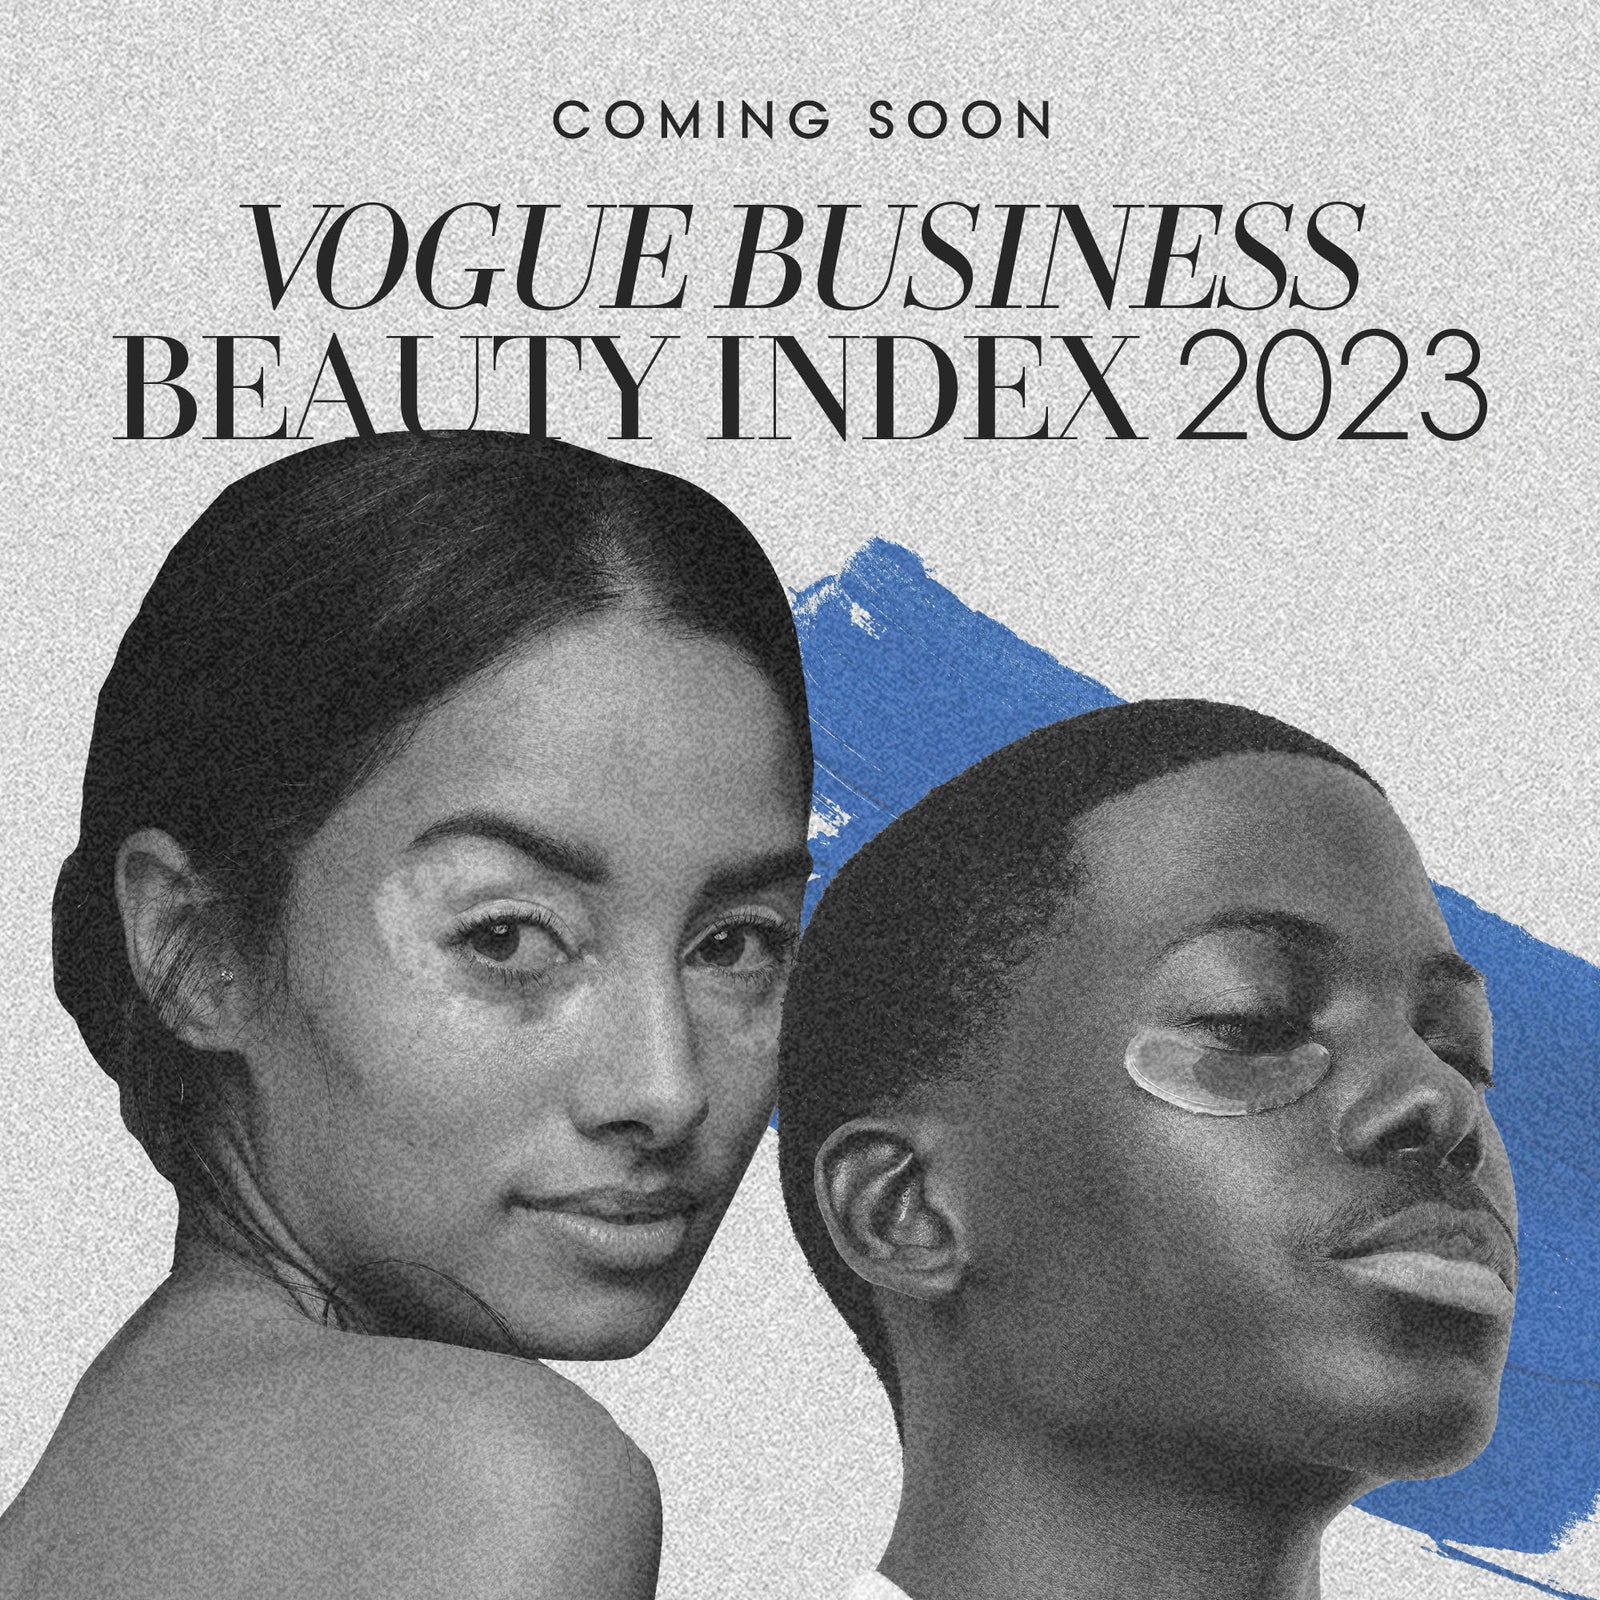 Coming soon &- The Vogue Business Beauty Index 2023